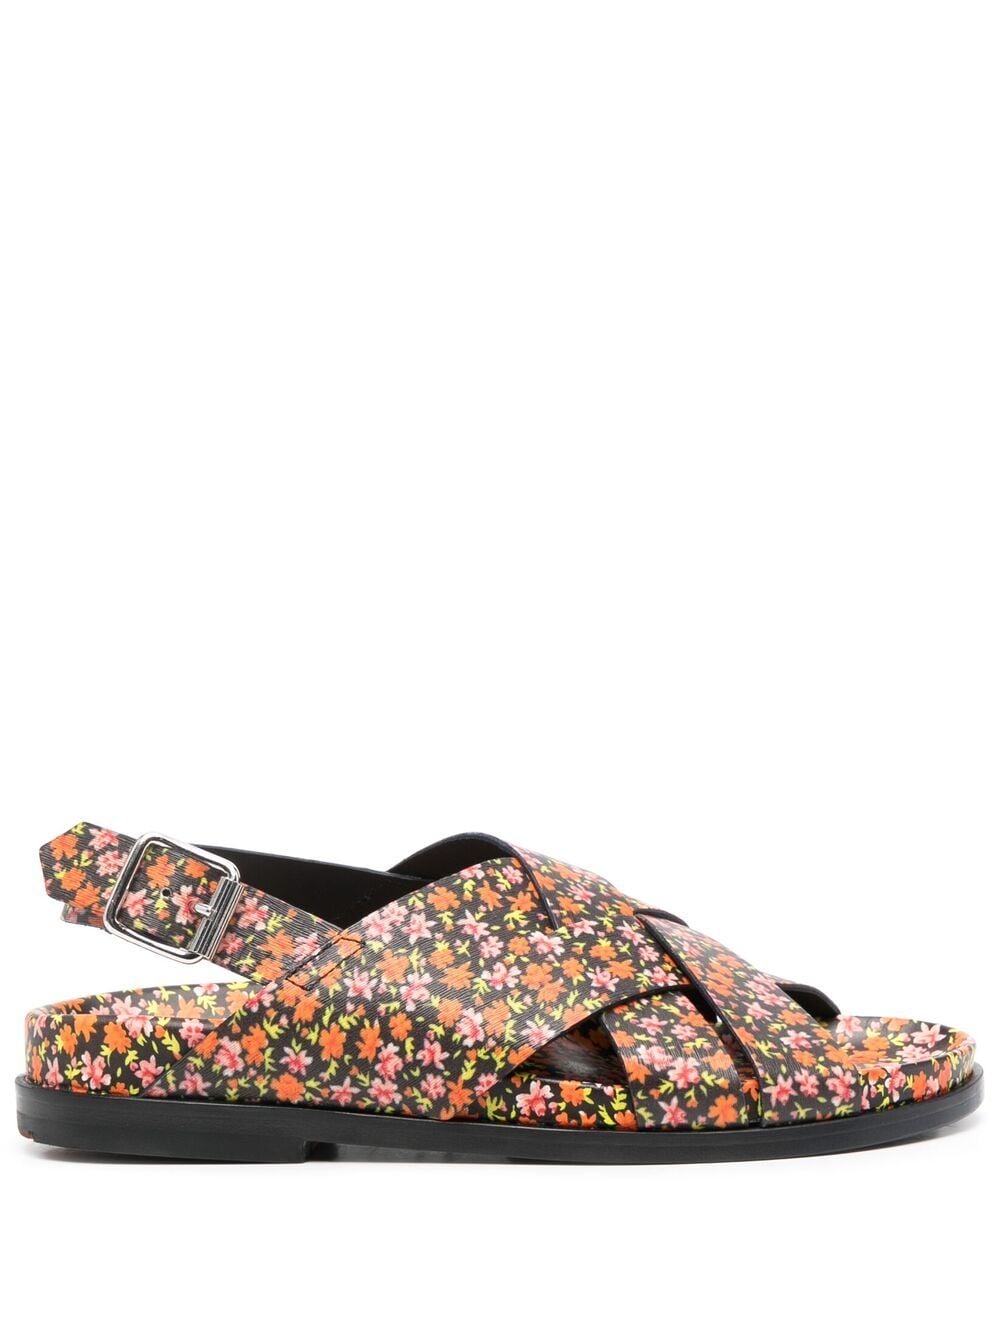 Paul Smith floral-print Leather Sandals - Farfetch